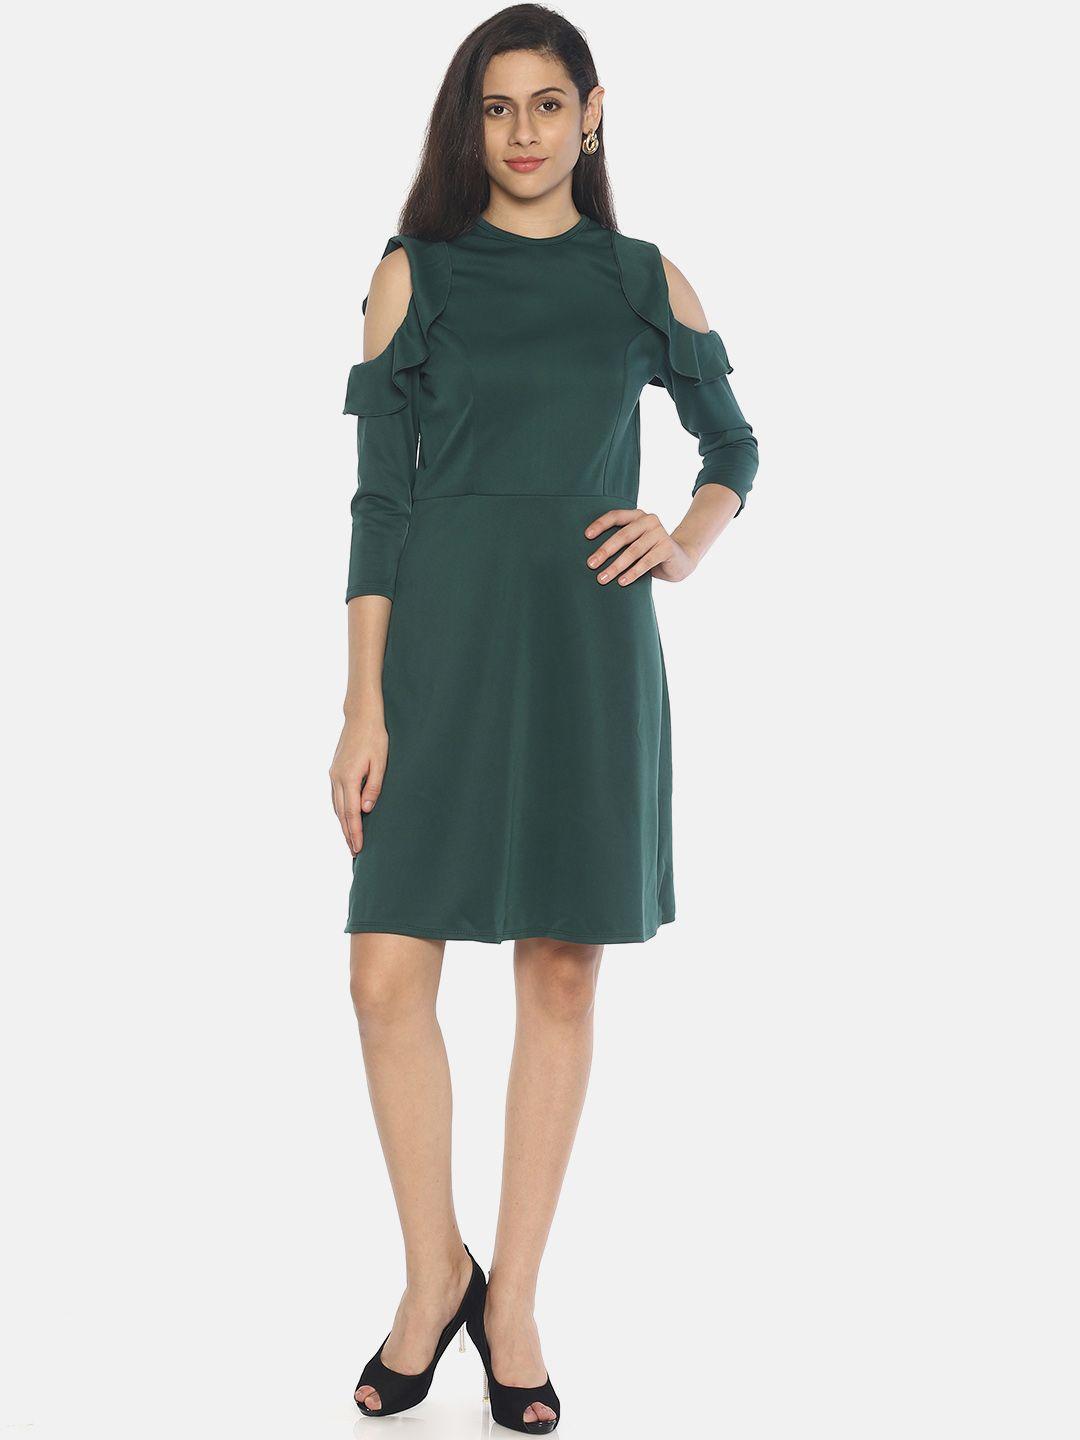 aara-women-solid-green-fit-and-flare-dress